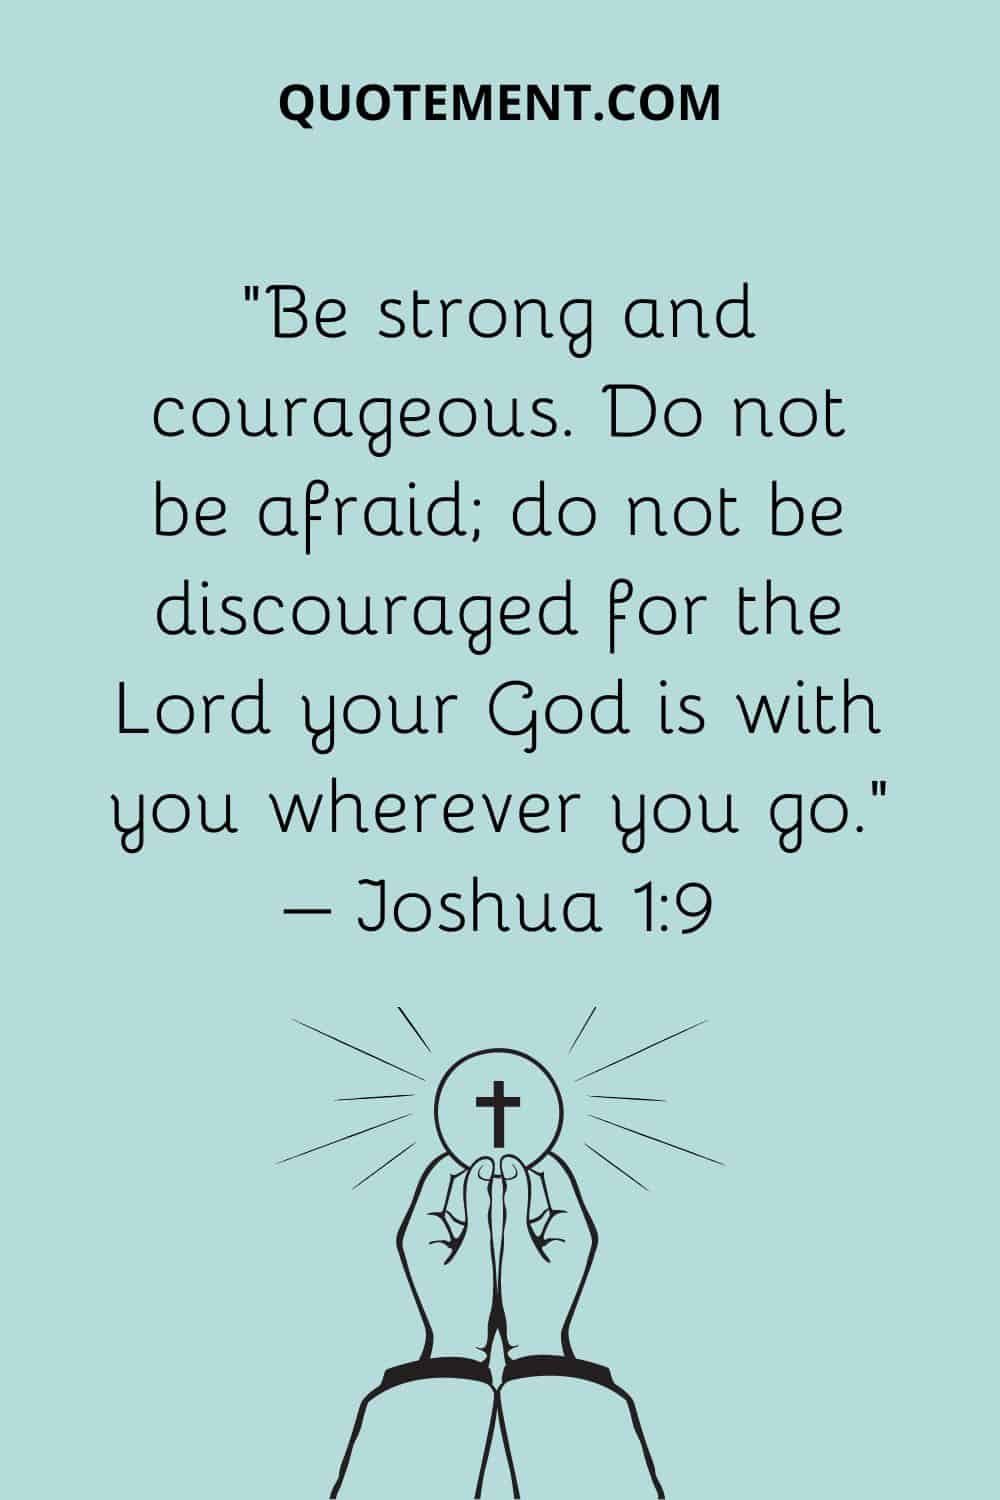 “Be strong and courageous. Do not be afraid; do not be discouraged for the Lord your God is with you wherever you go.” – Joshua 19